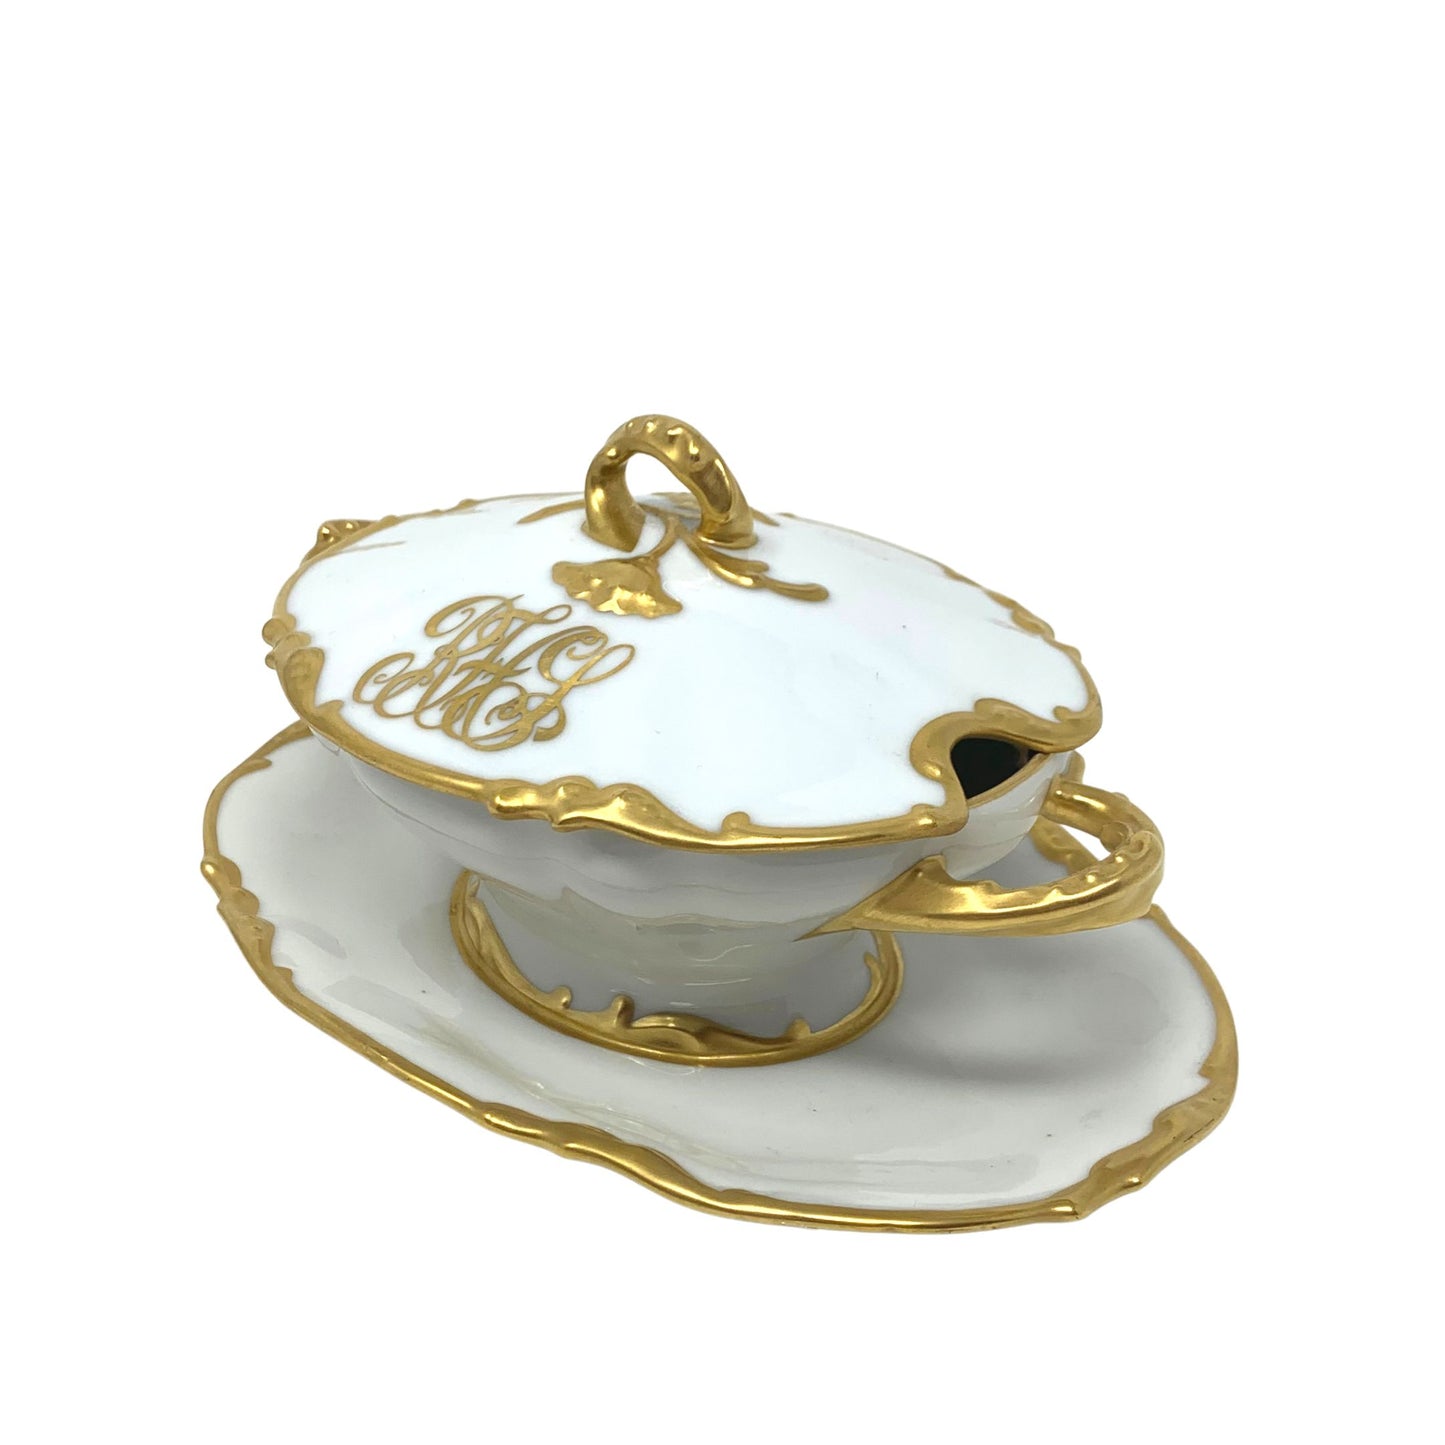 Jean Pouyat Limoges Saucer Tureen With Lid & Attached Underplate